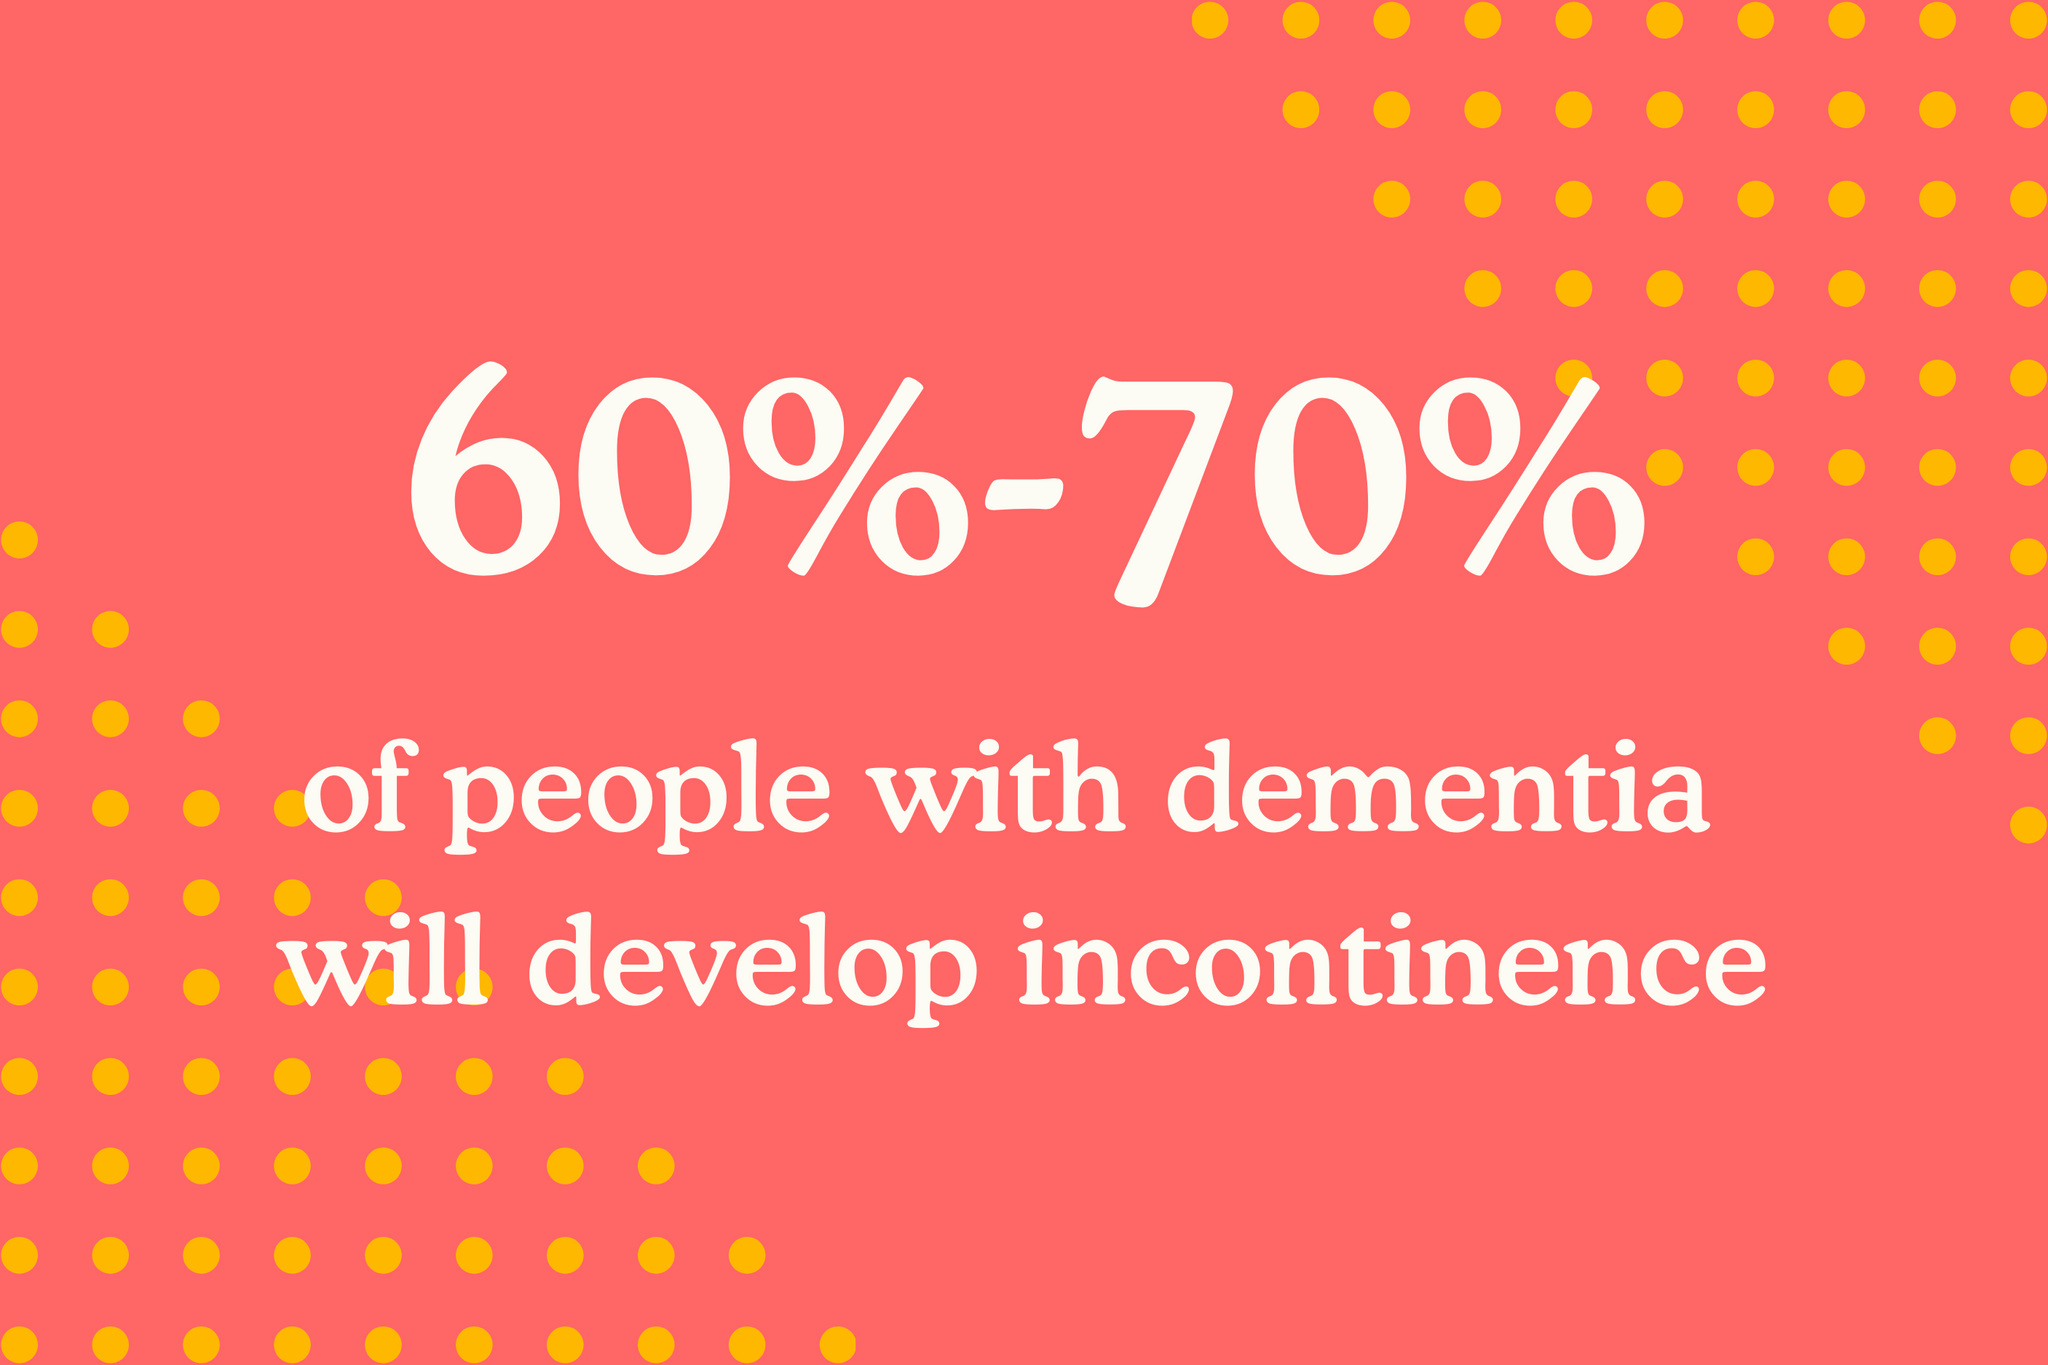 An infographic that says "60-70% of people with dementia will develop incontinence"